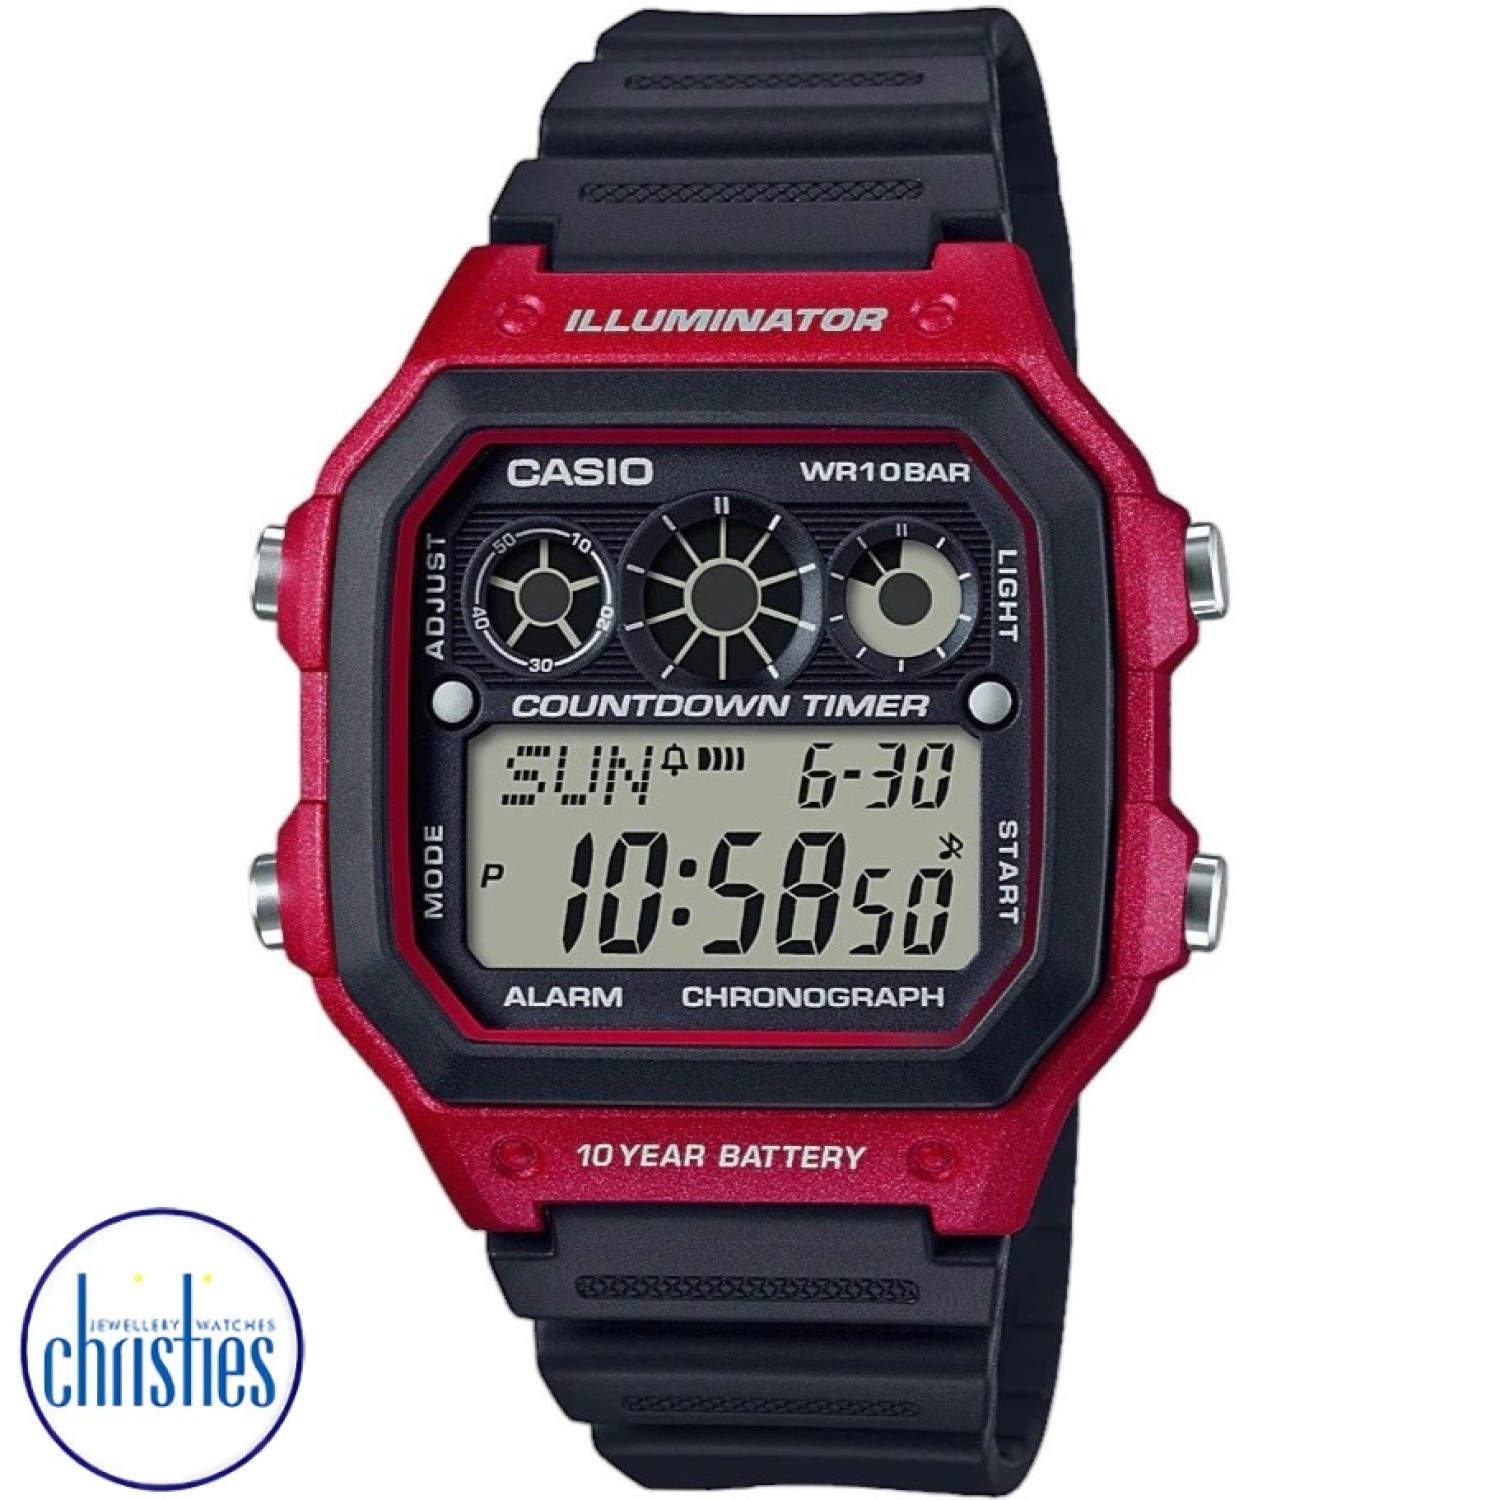 AE1300WH-4A Casio. 2 Year Casio Guarantee which is only available at authorised New Zealand Casio Stockist 3 Months No Payments and Interest for Q Card holders Resin Glass This watch is pressure rated at 100 metres or 10bar. This makes @christies.online